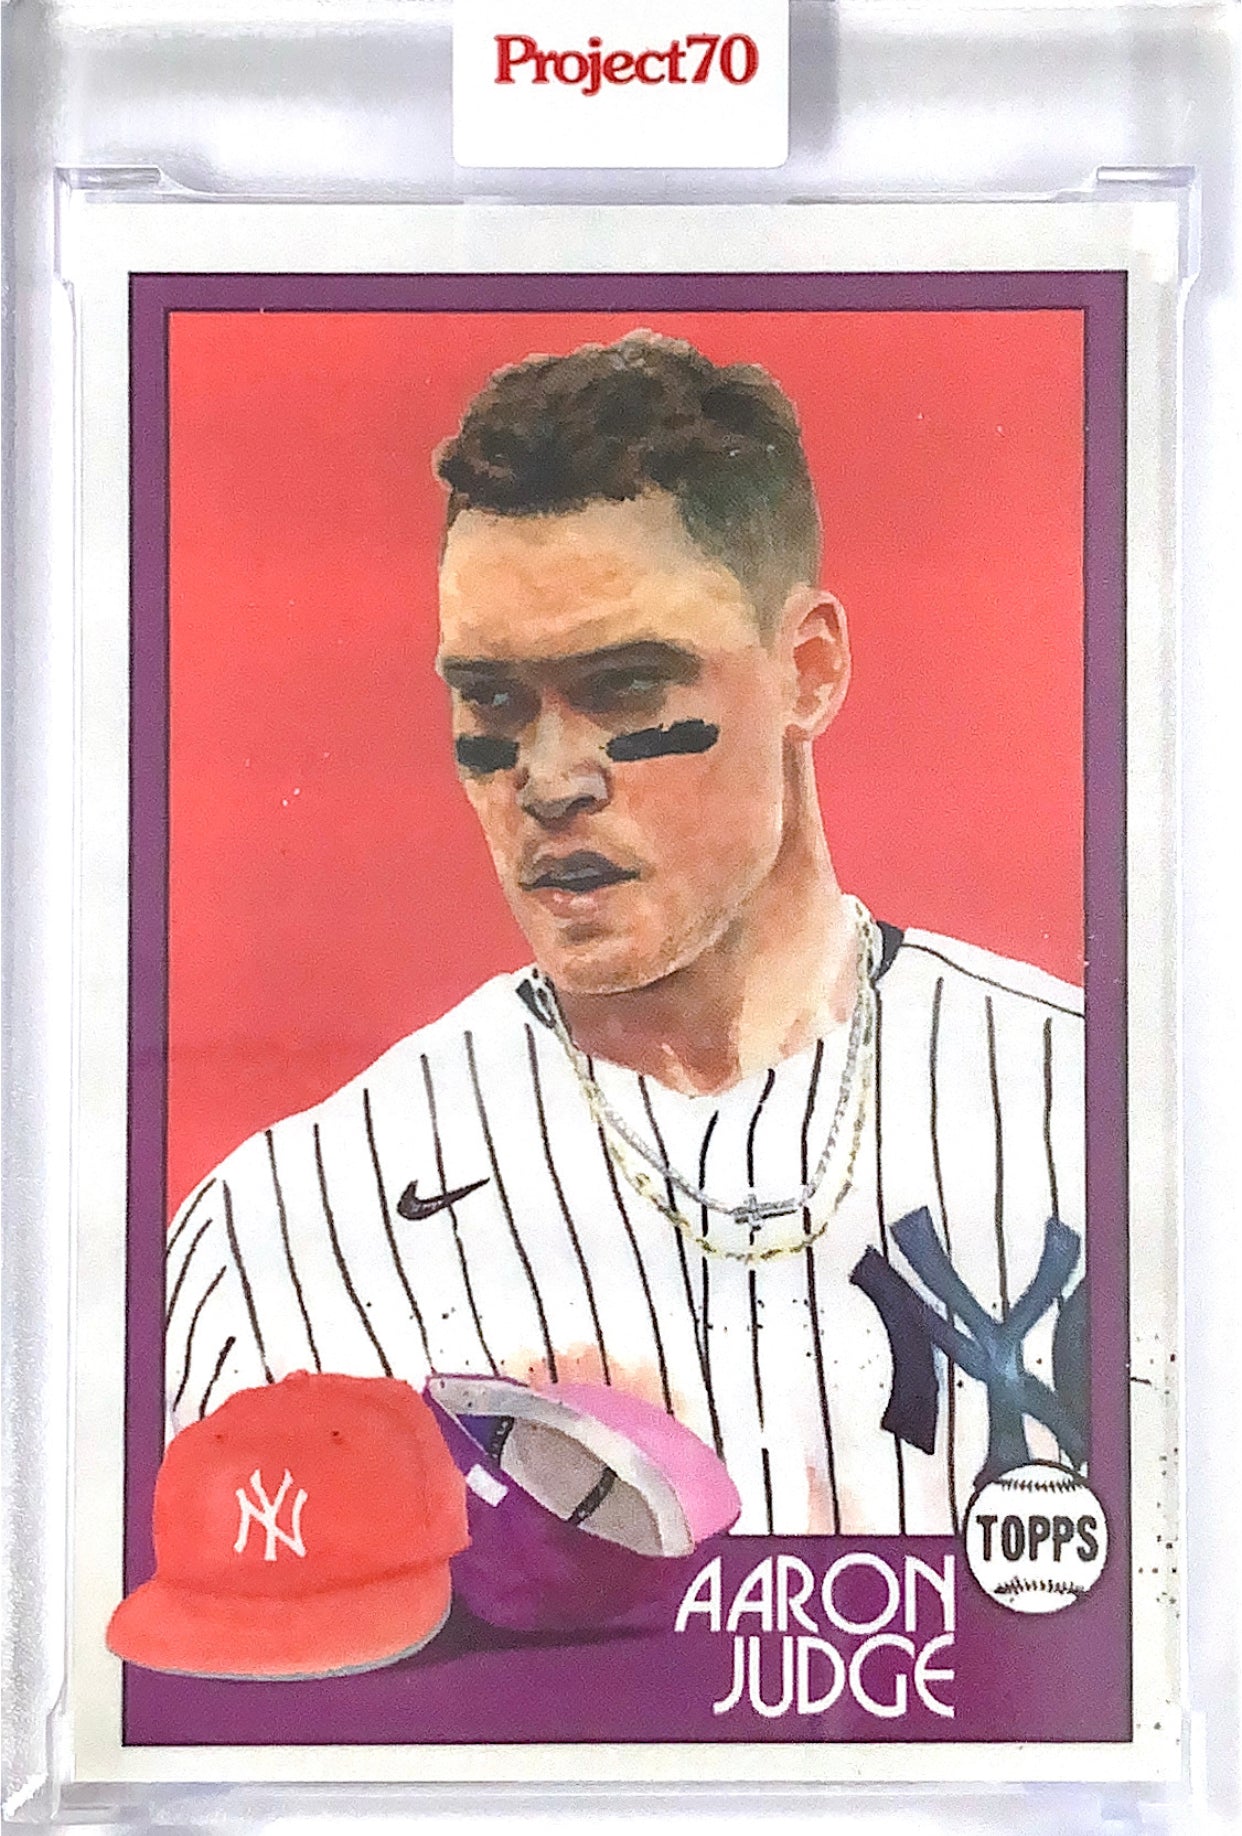 Topps Project 70 - 1981 Aaron Judge by Jacob Rochester